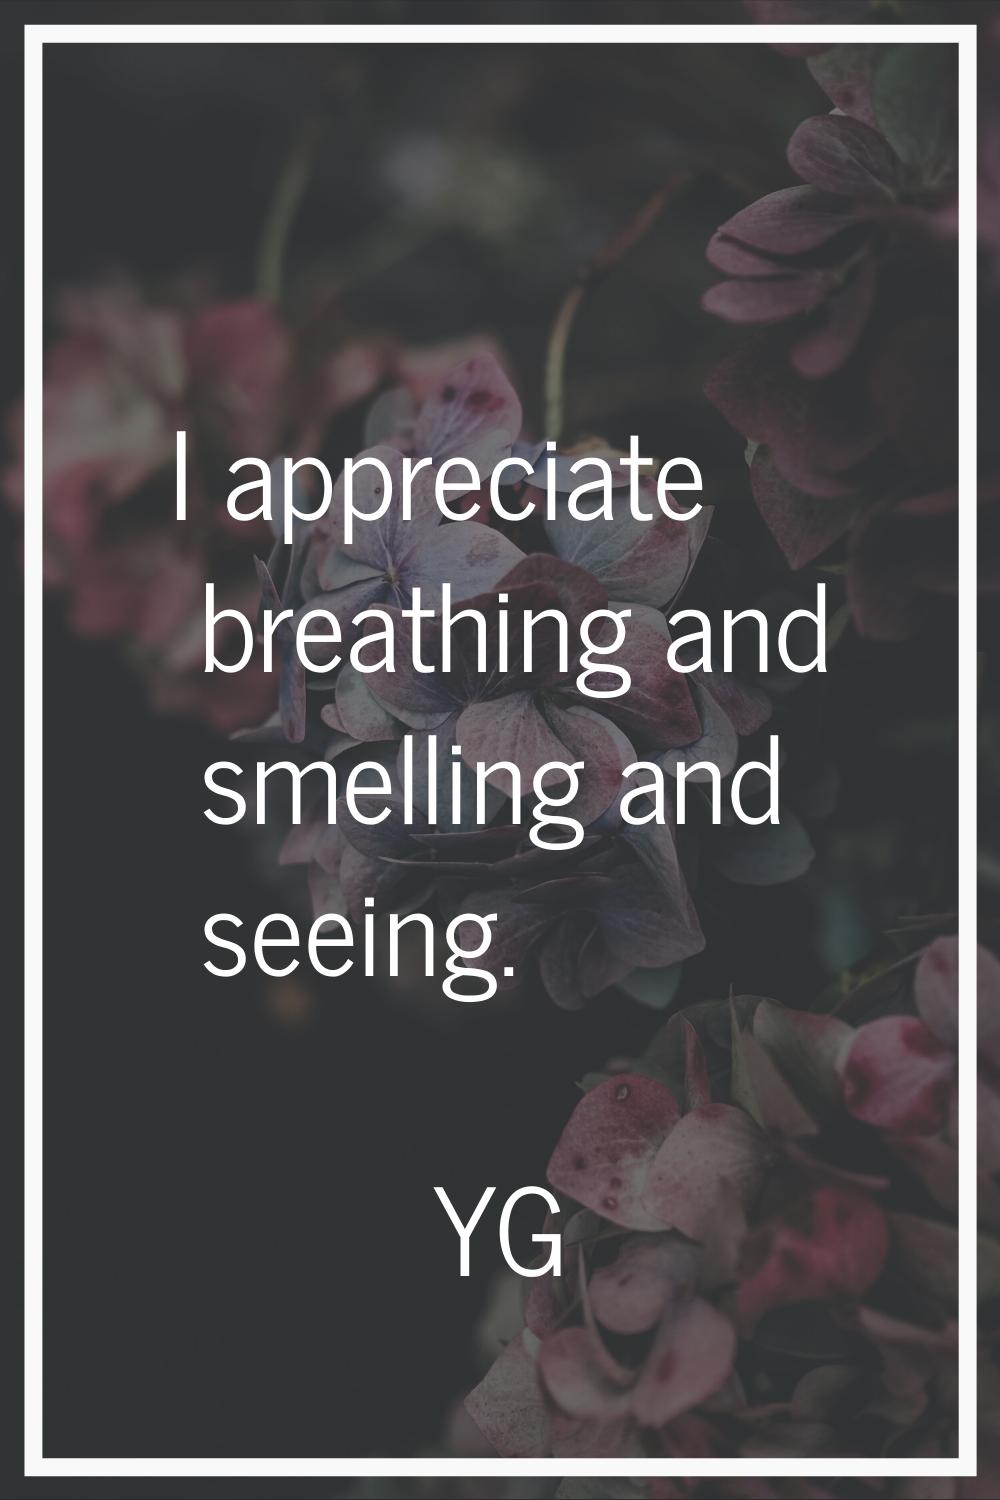 I appreciate breathing and smelling and seeing.